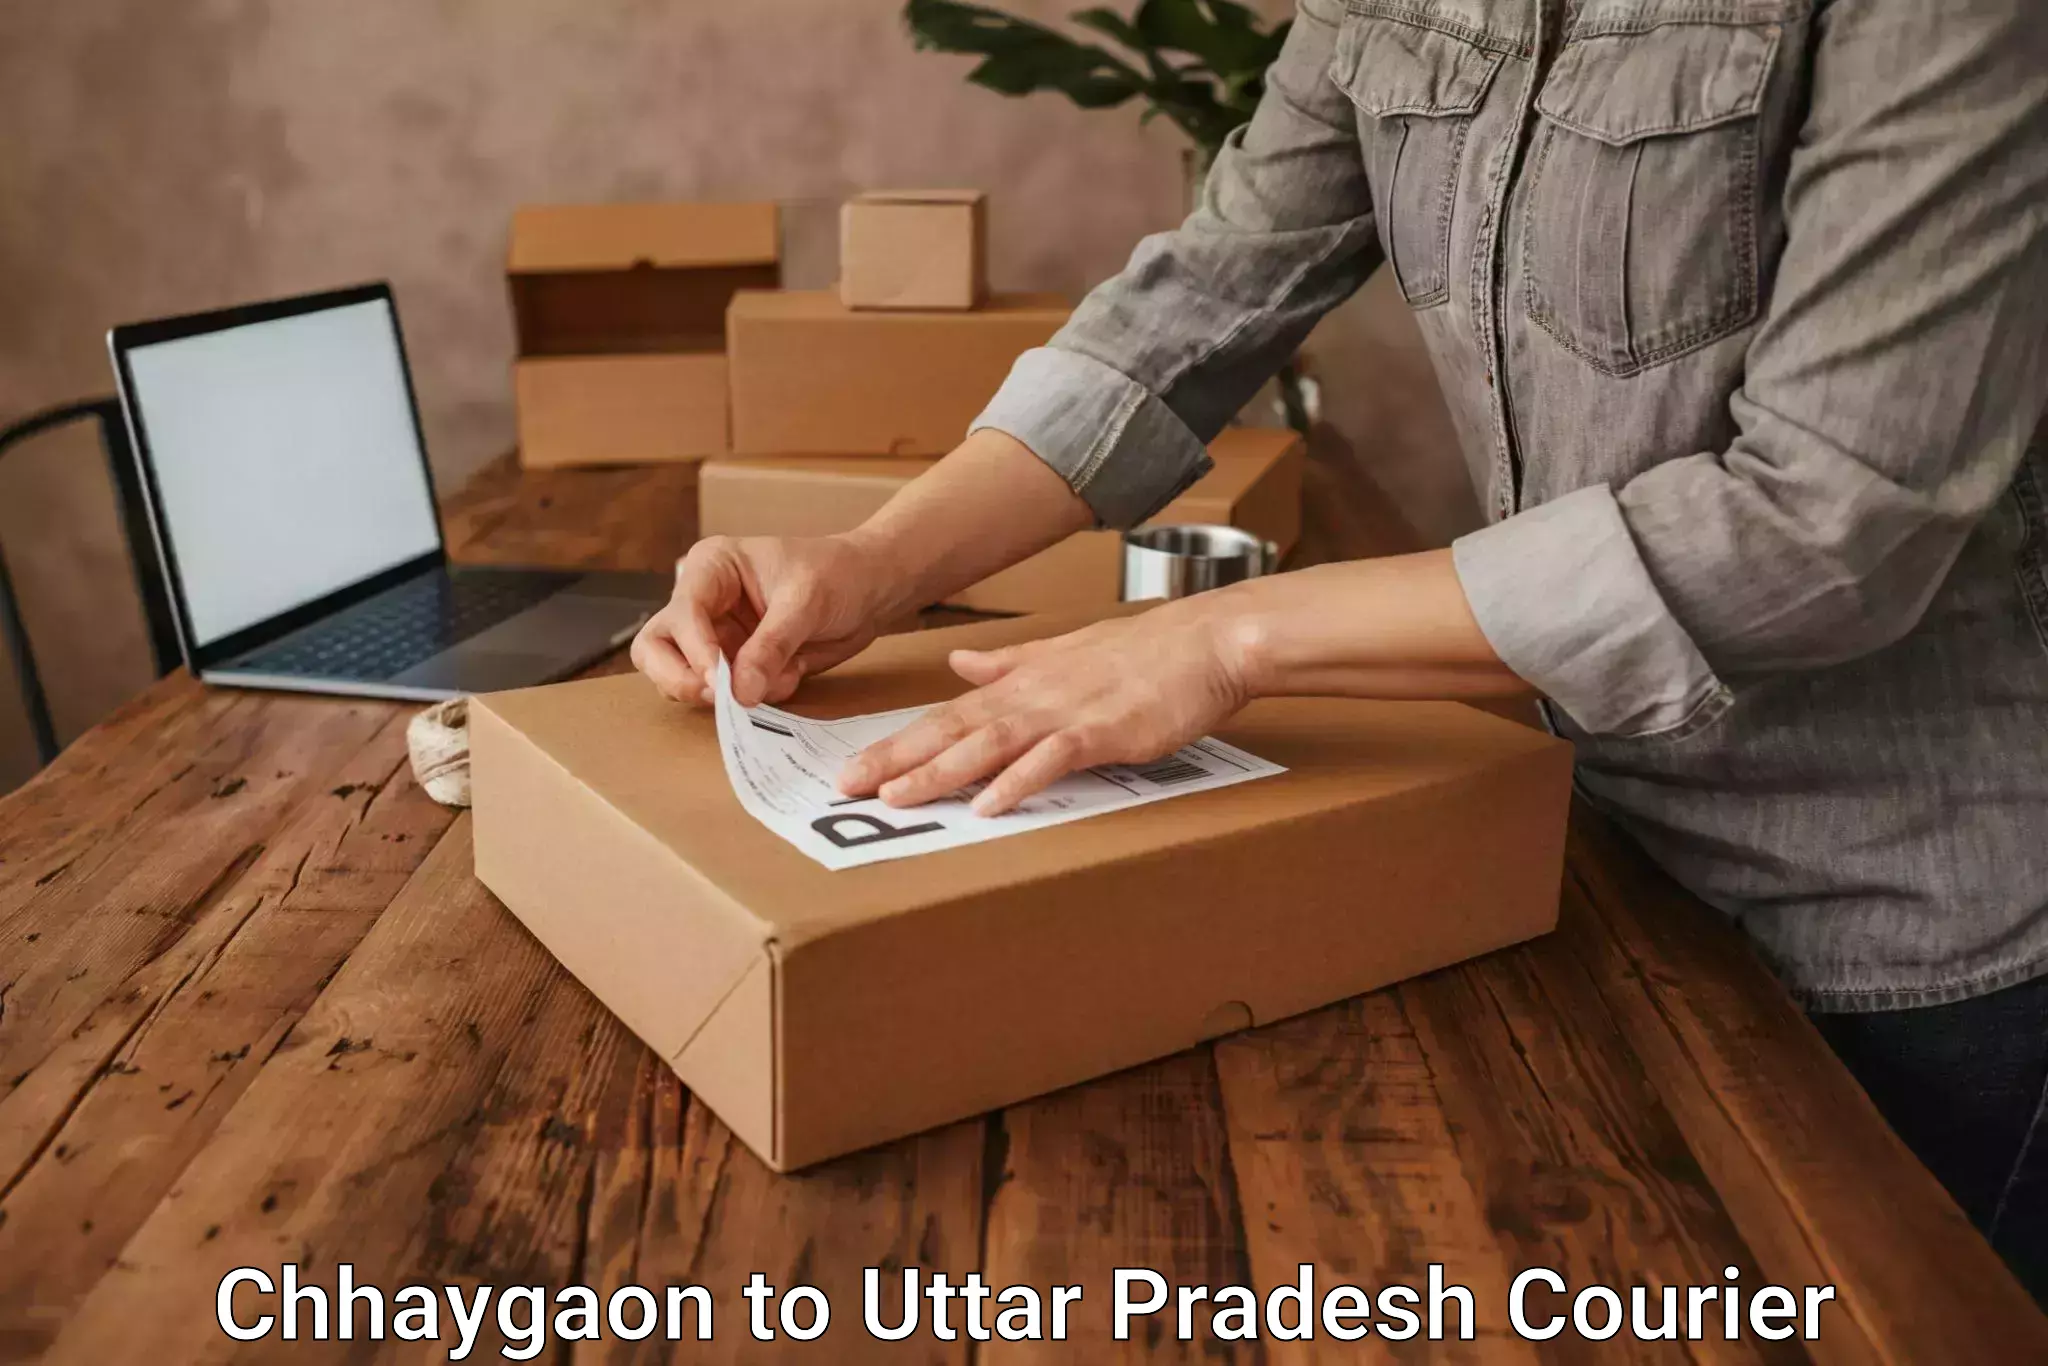 Nationwide delivery network Chhaygaon to Uttar Pradesh